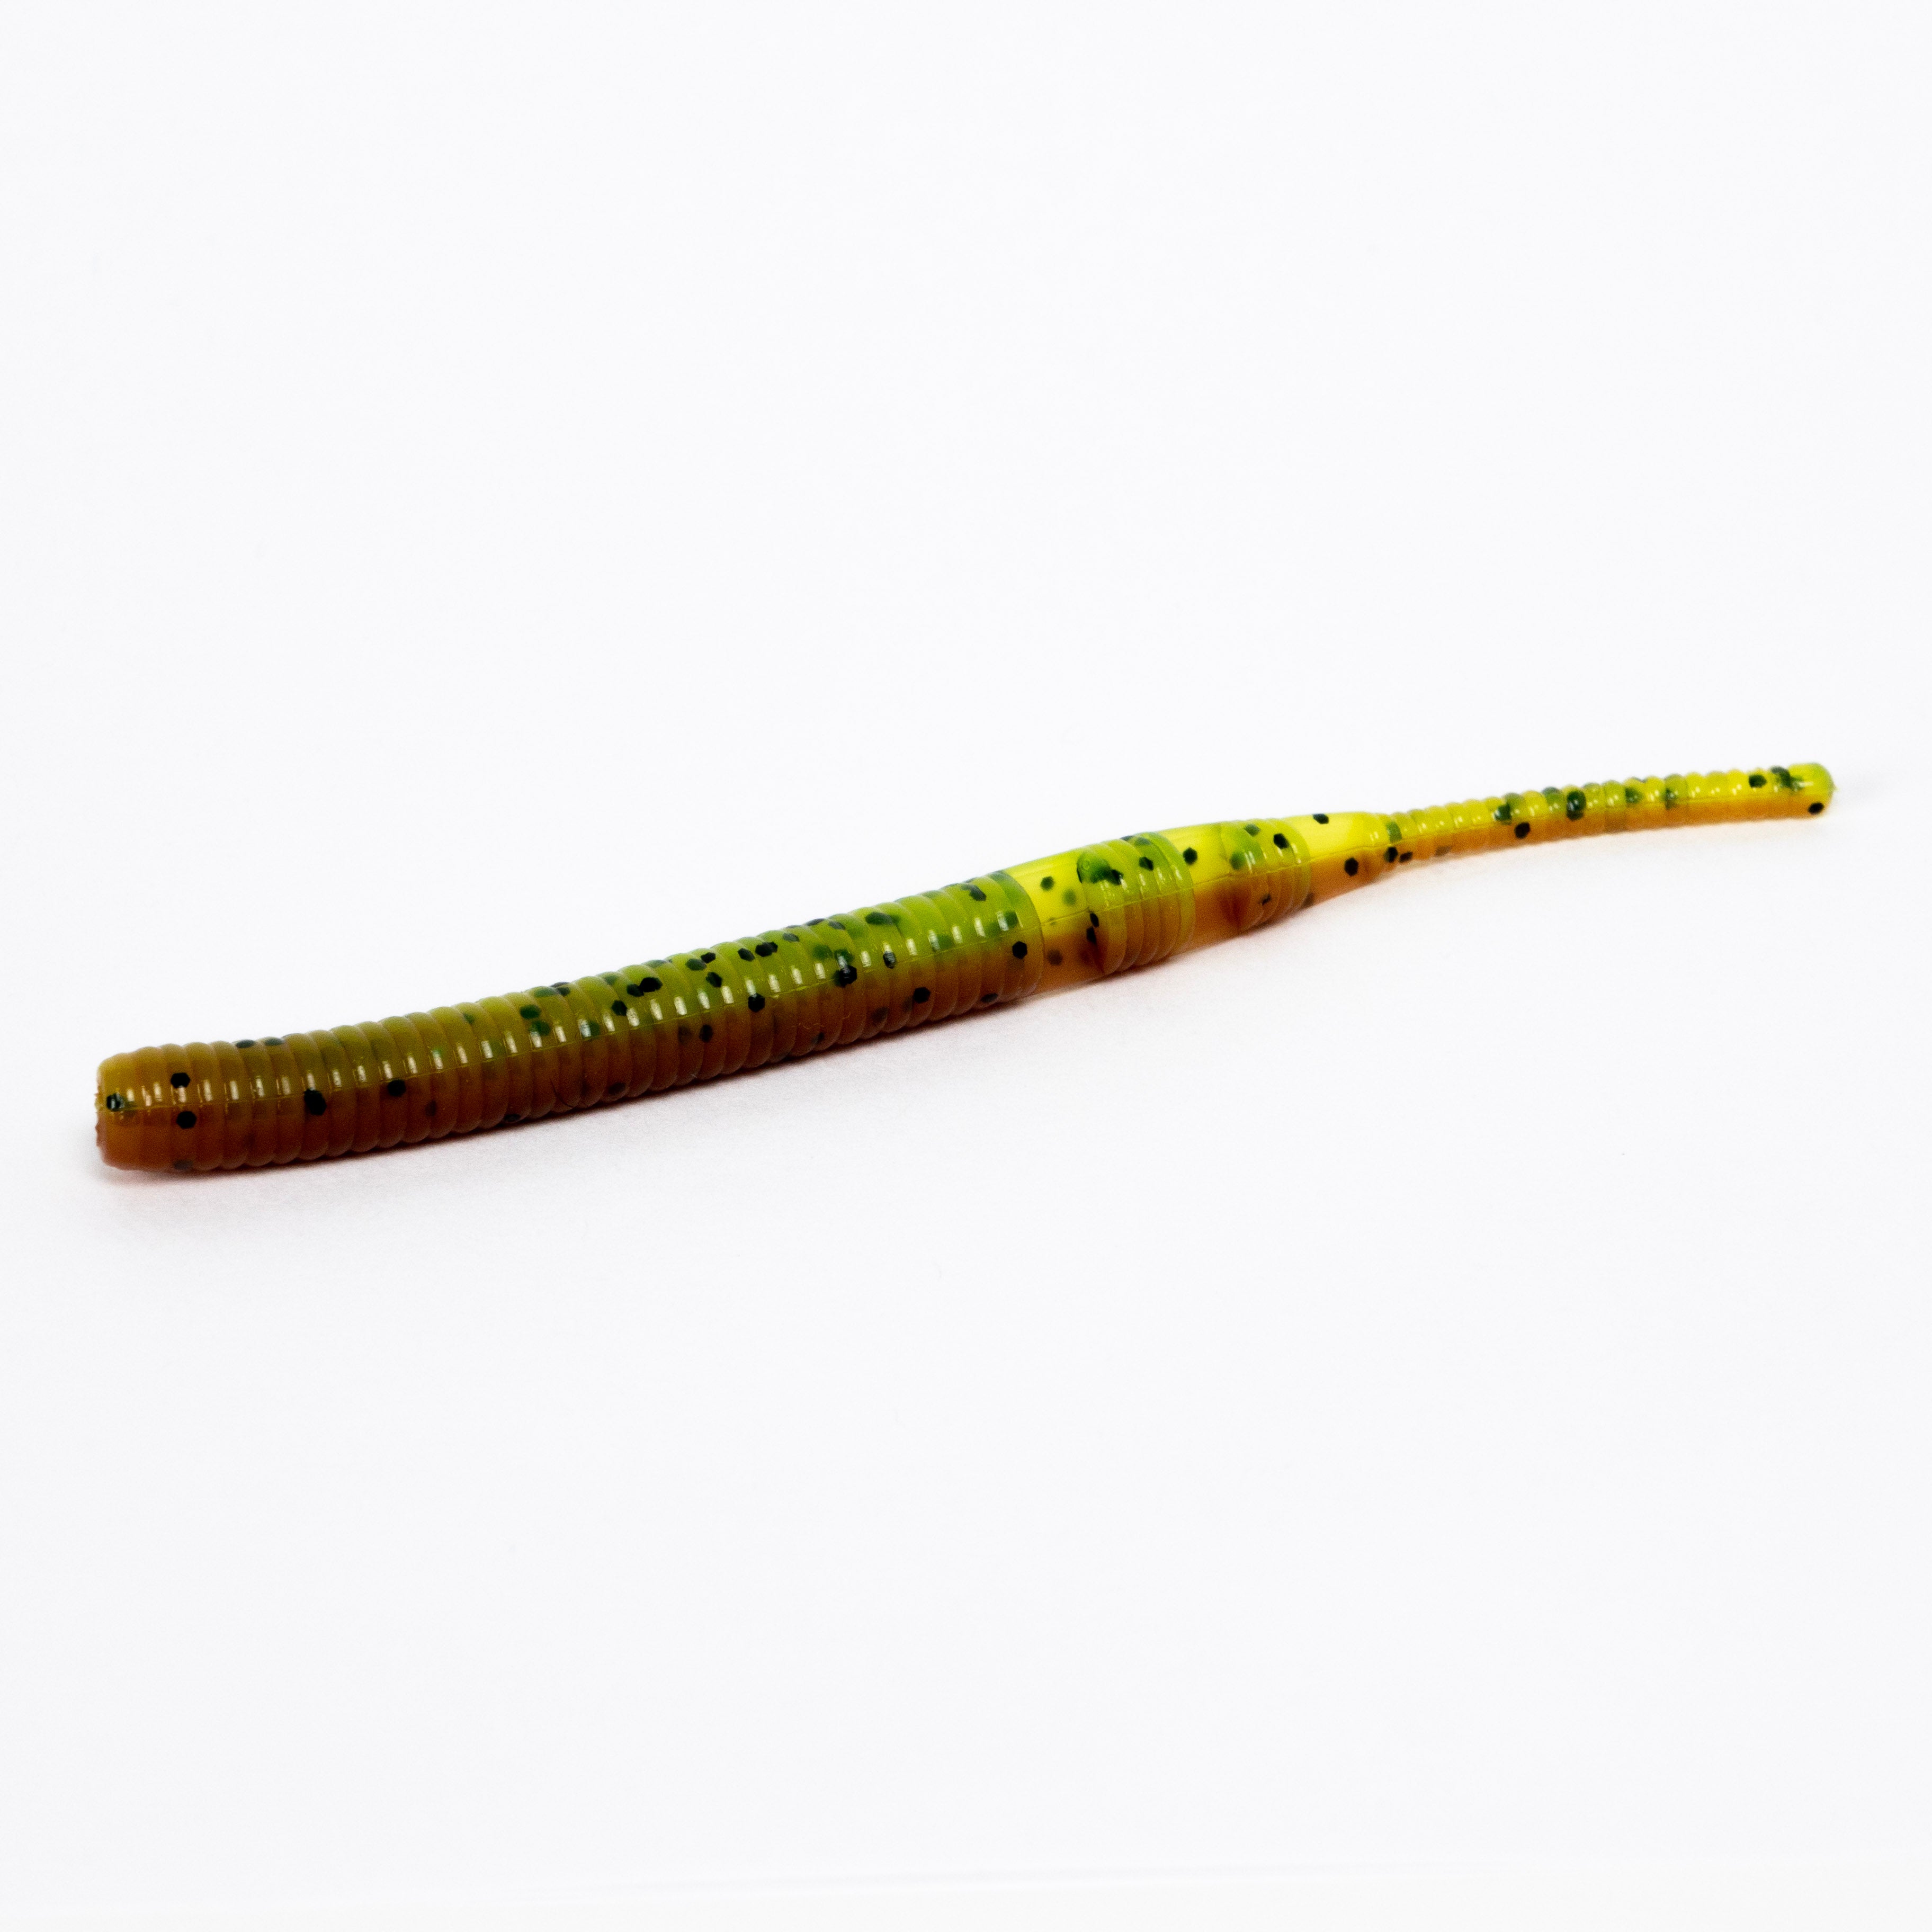 Hyper Finesse Worm – Lake Fork Trophy Lures